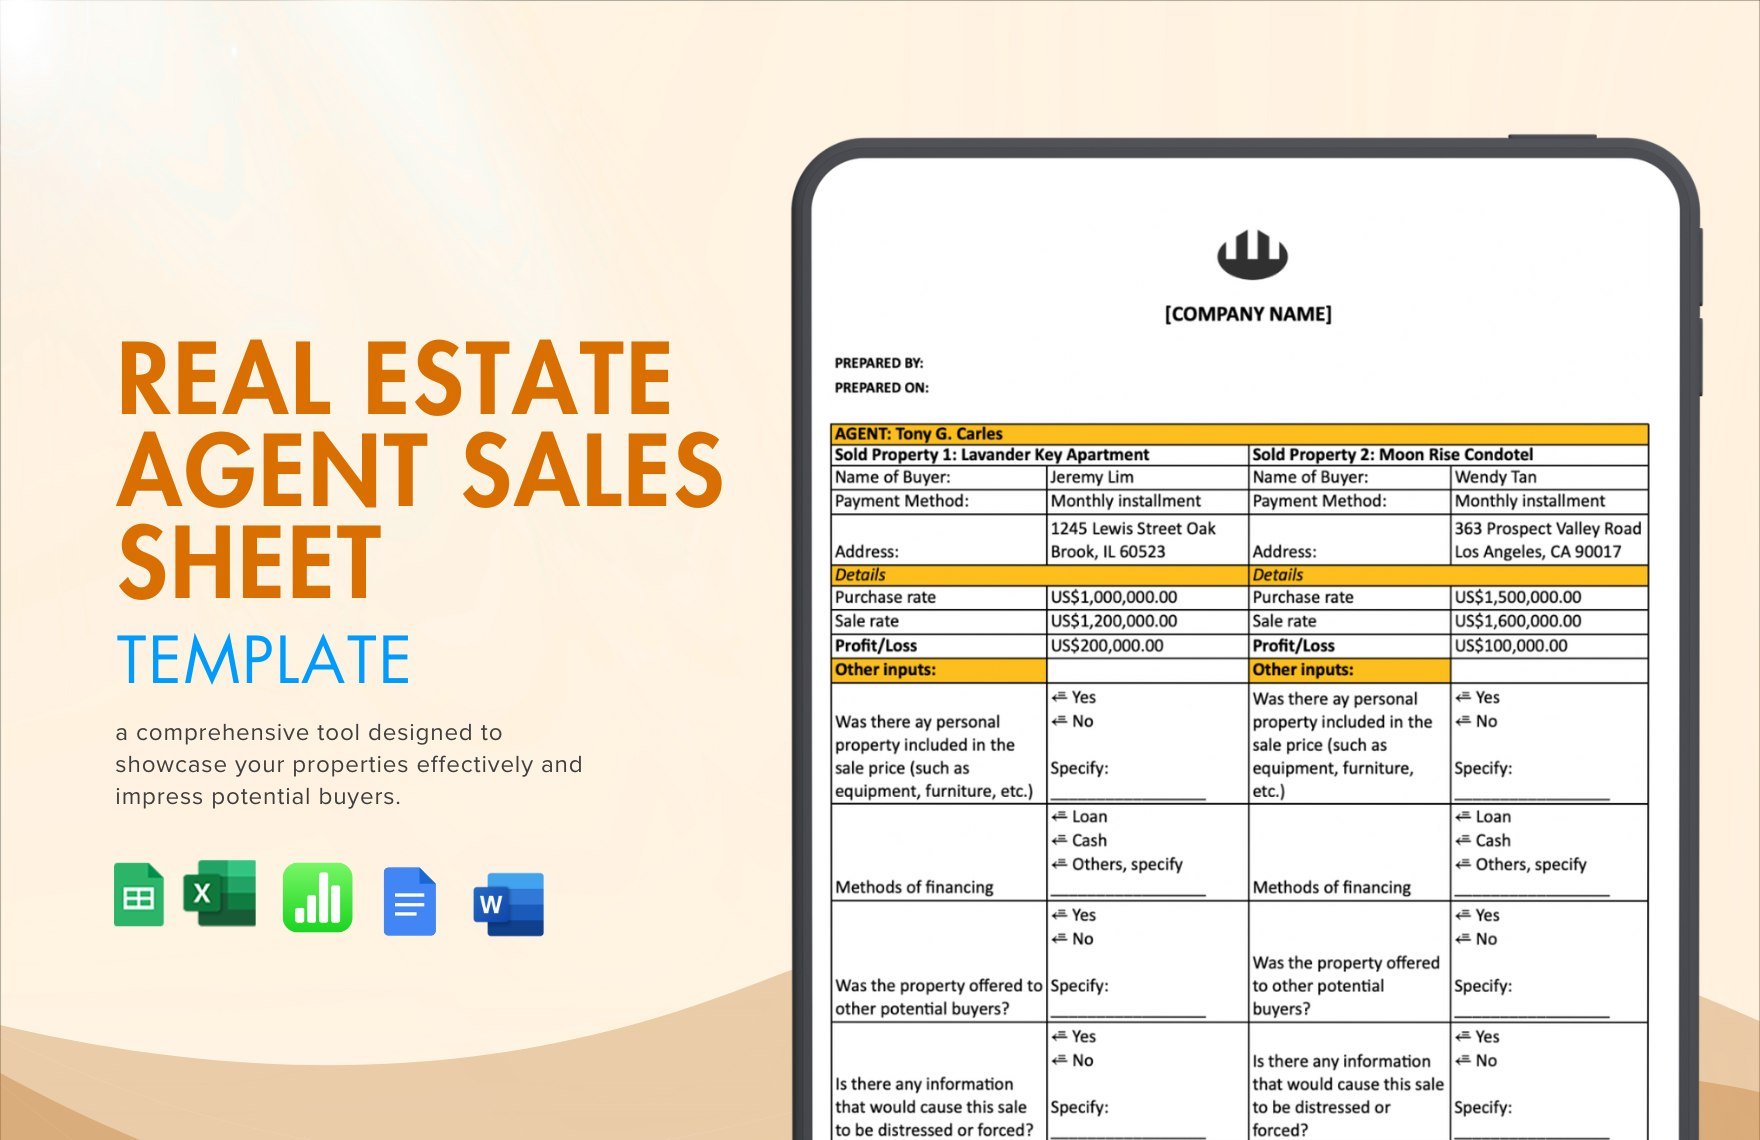 Real Estate Agent Sales Sheet Template in Word, Google Docs, Excel, Google Sheets, Apple Numbers